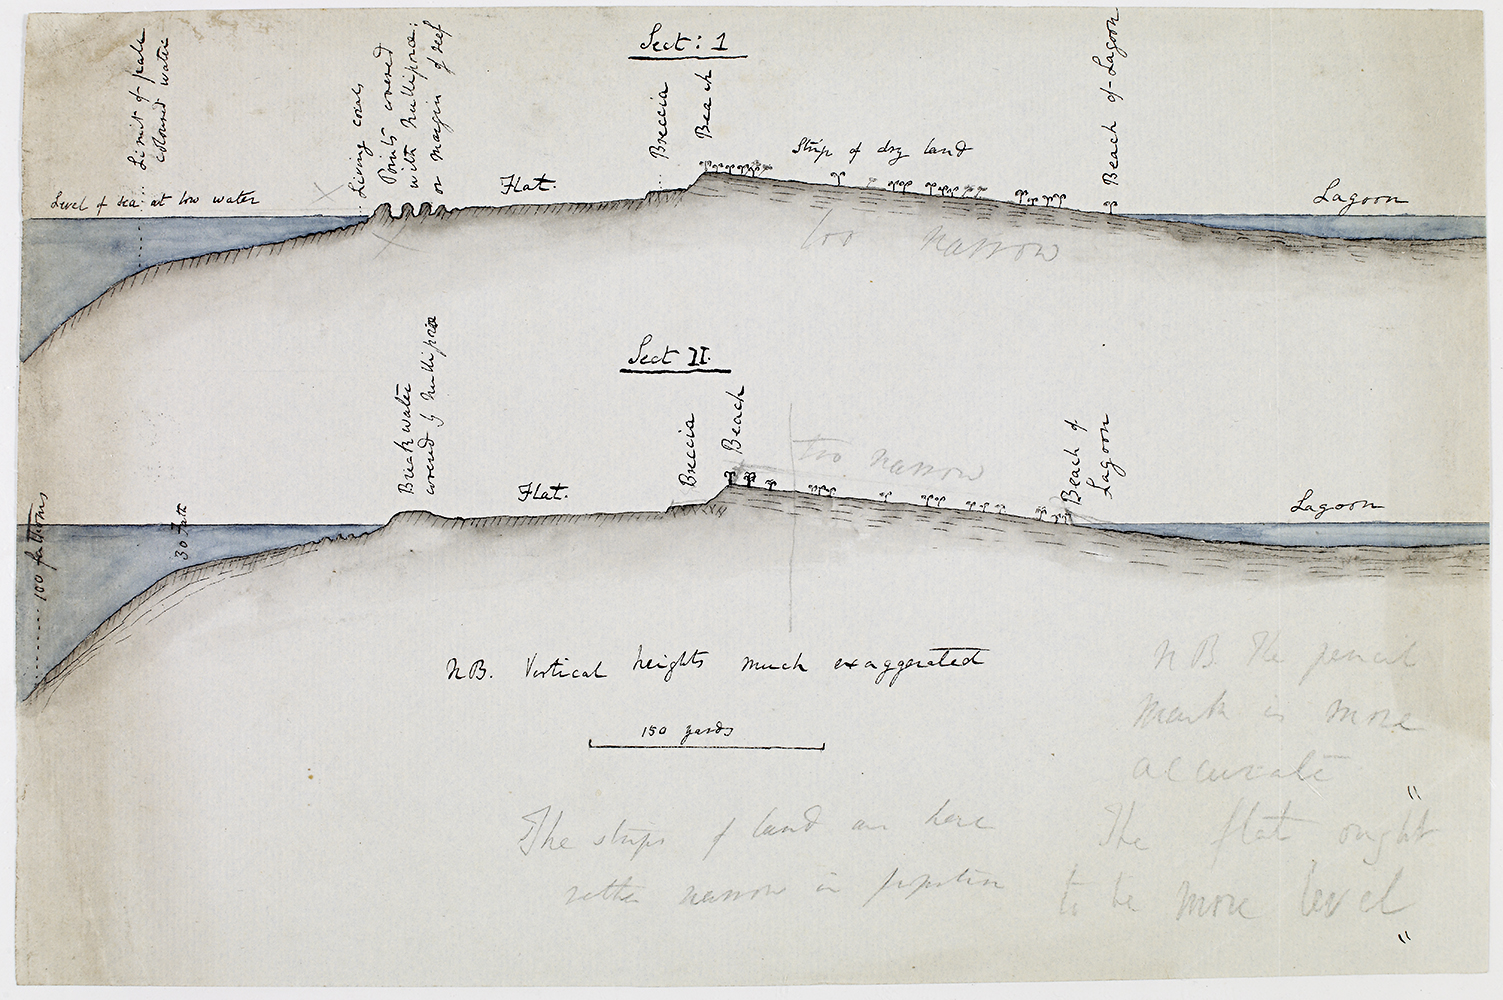 Darwin’s hand-coloured cross-sectional view of the reef at Cocos (Keeling) atoll